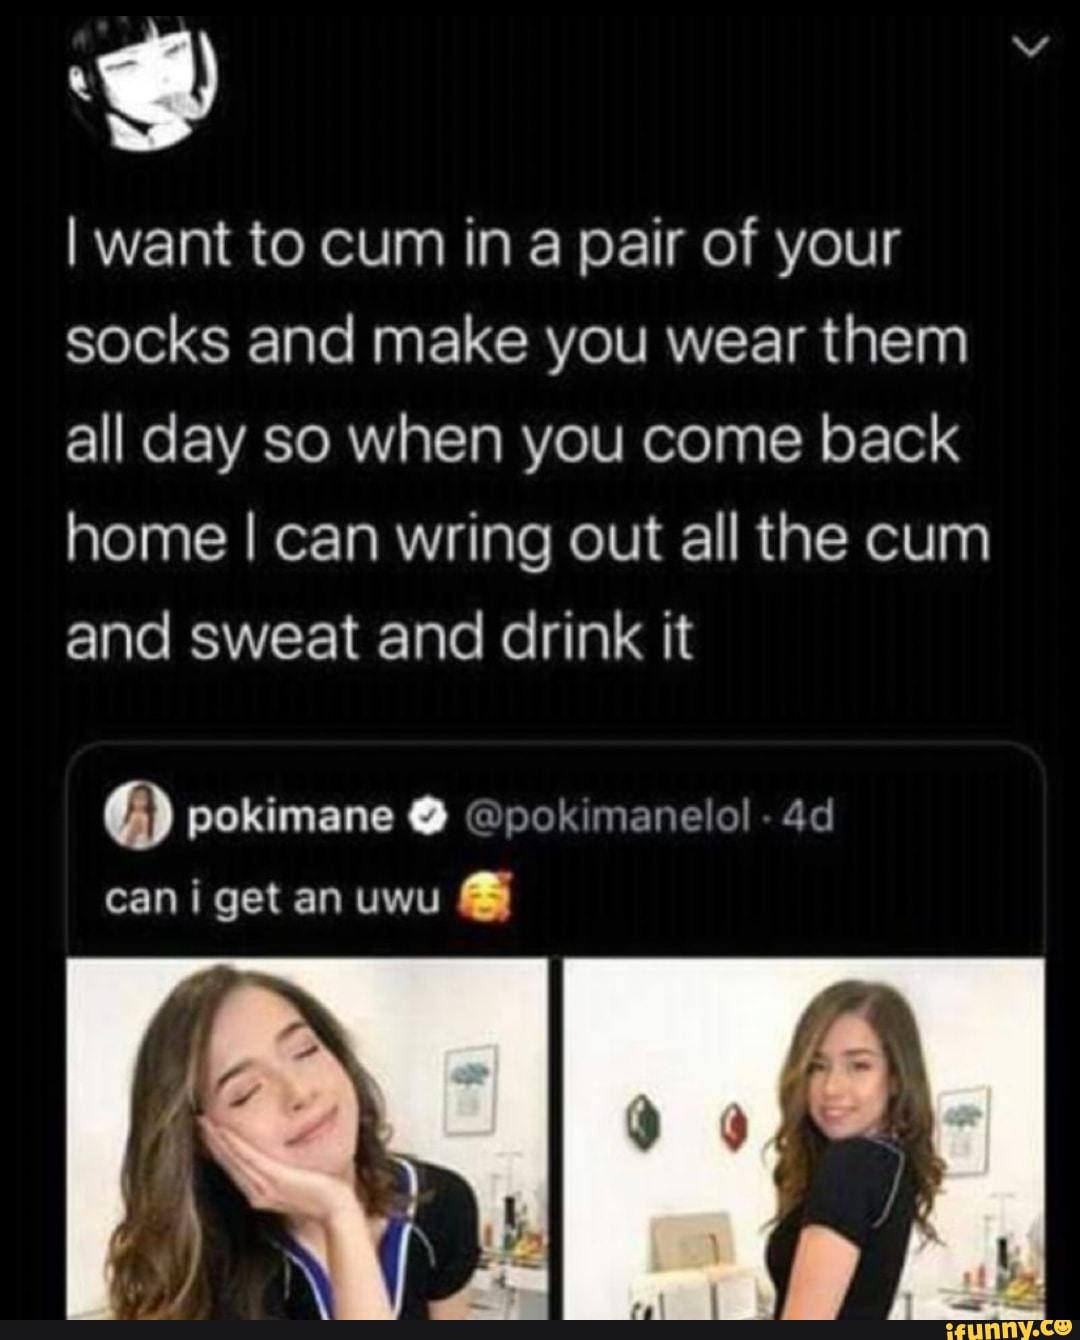 I want to make you cum